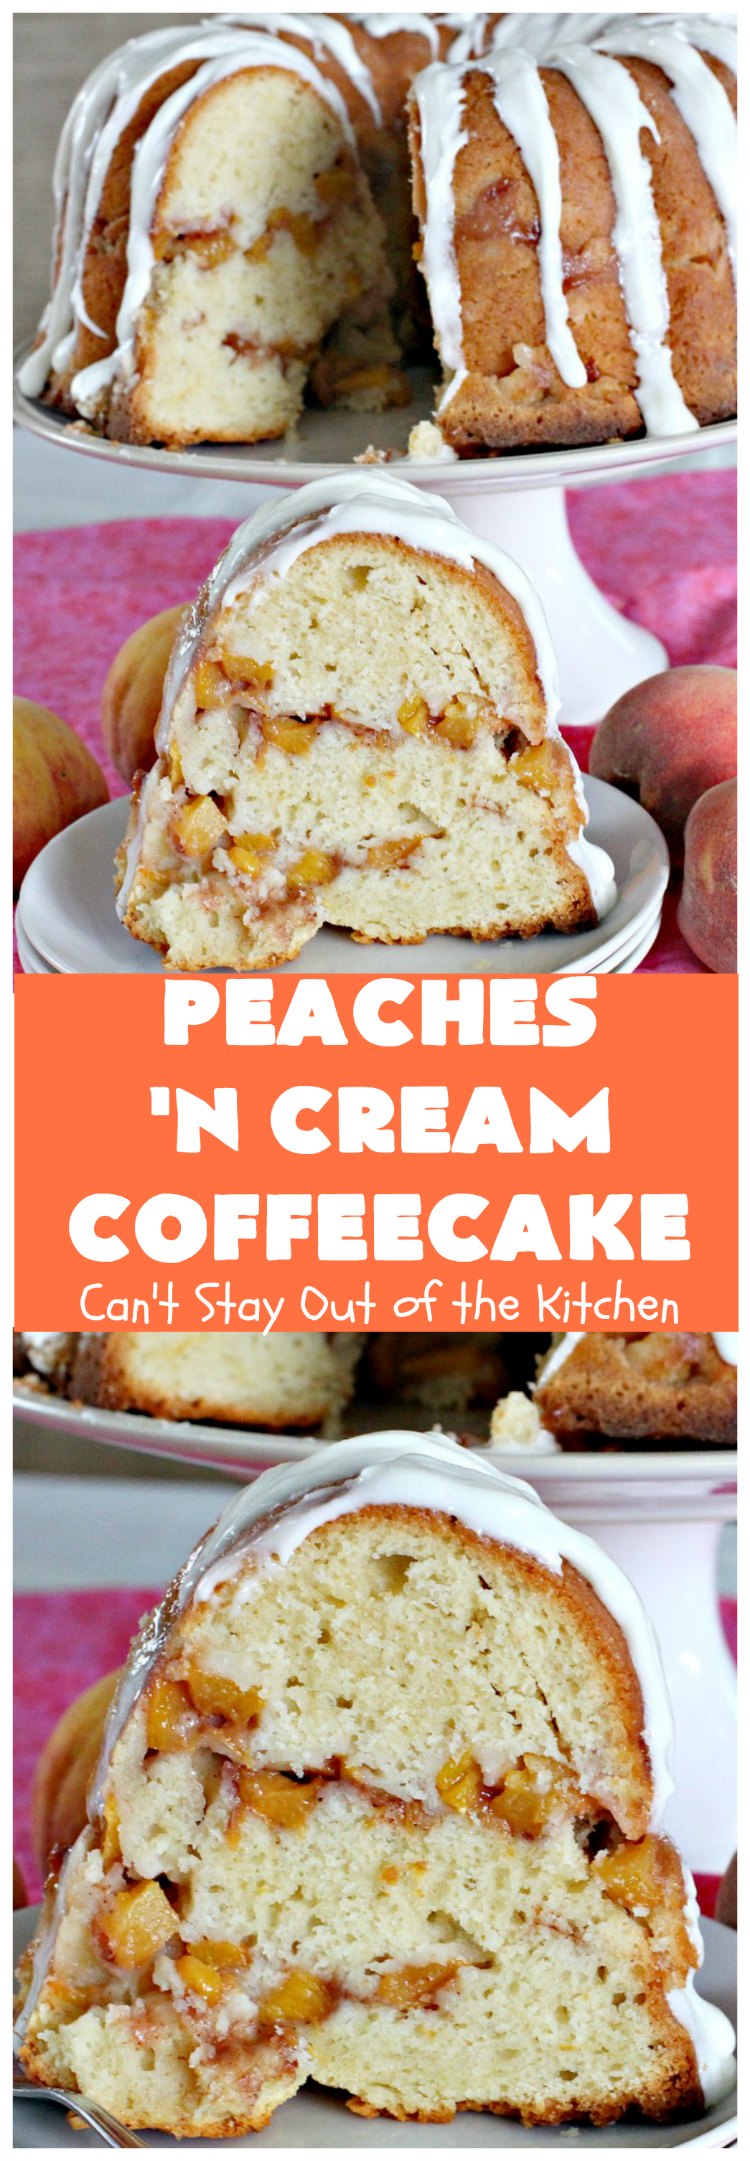 Peaches 'n Cream Coffeecake | Can't Stay Out of the Kitchen